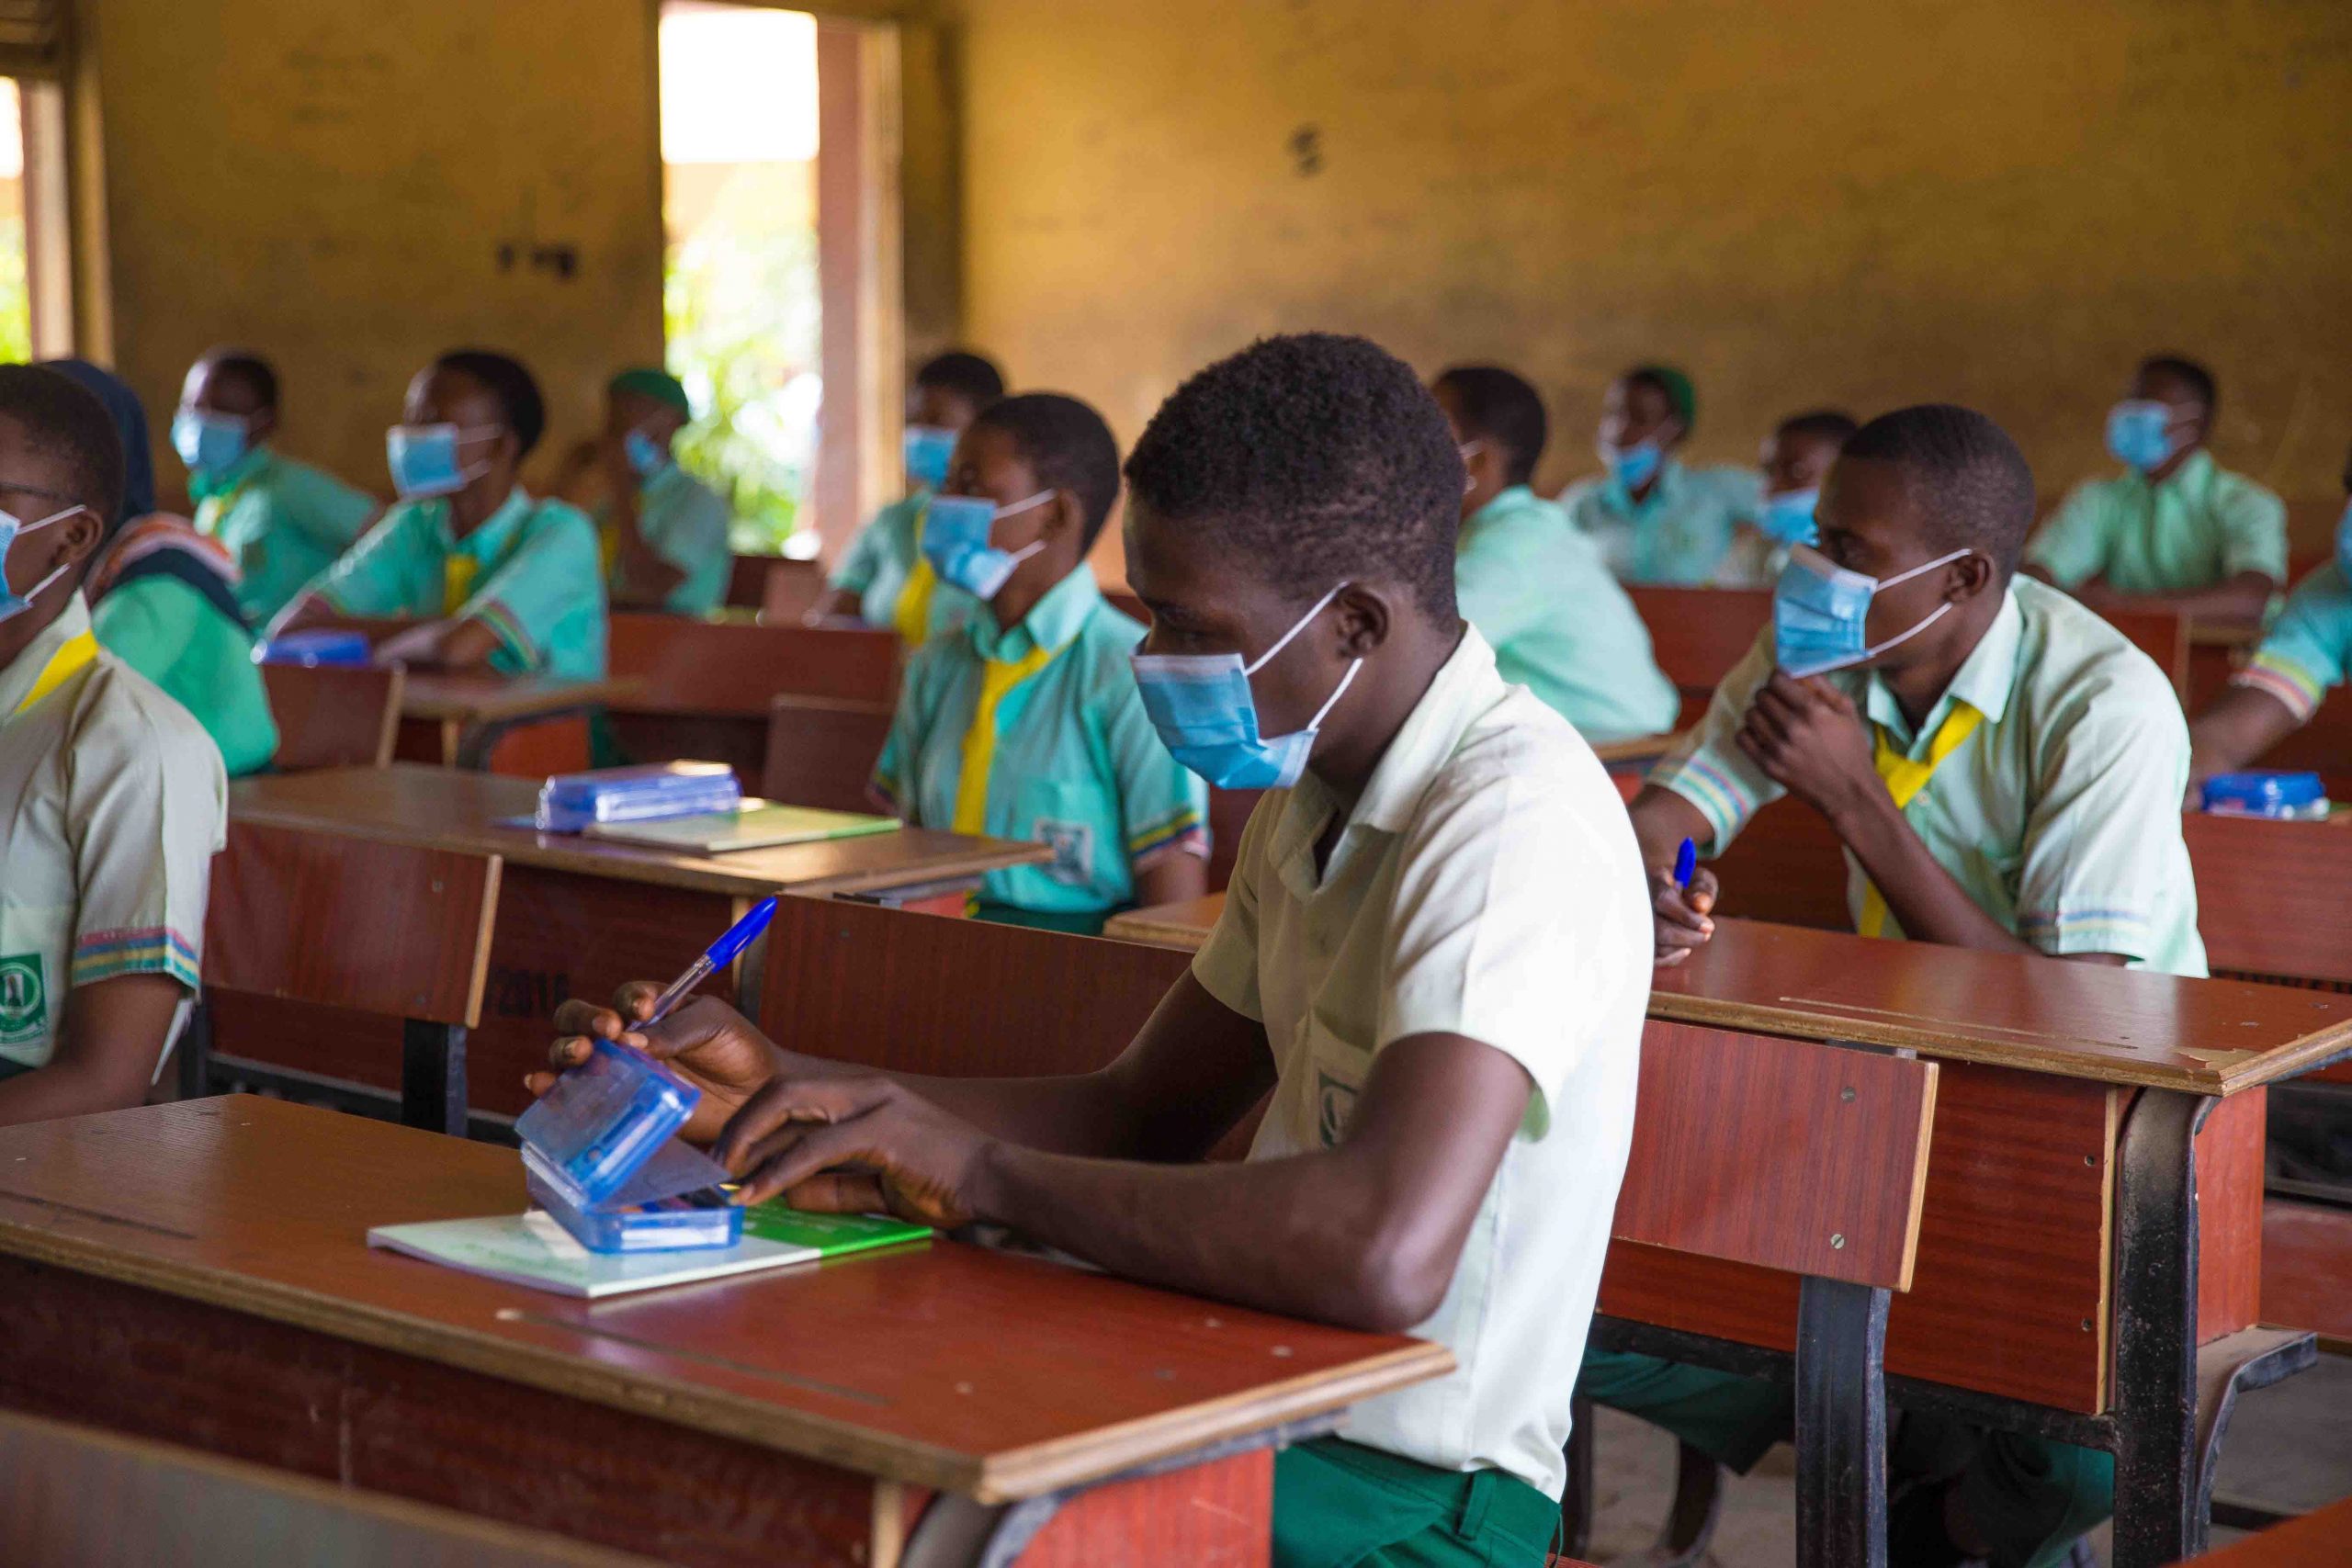 Final year students in a Lagos school wear masks and kept physical distance from each other while they wrote their WAEC exam, earlier today